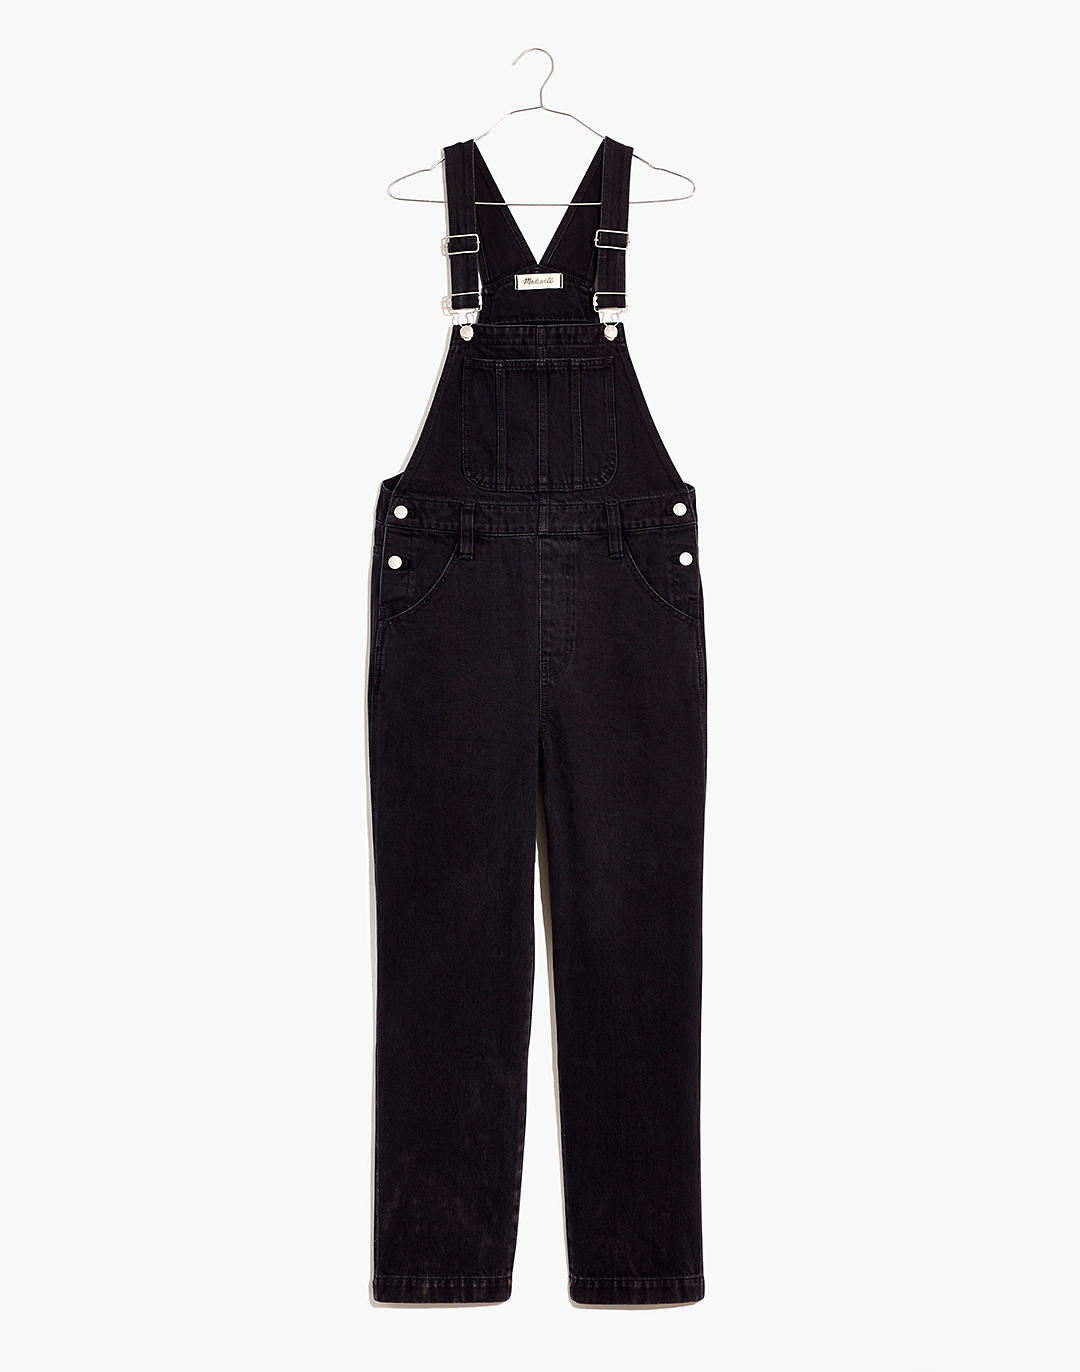 Women's Straight-Leg Overalls in Lunar Wash | Madewell